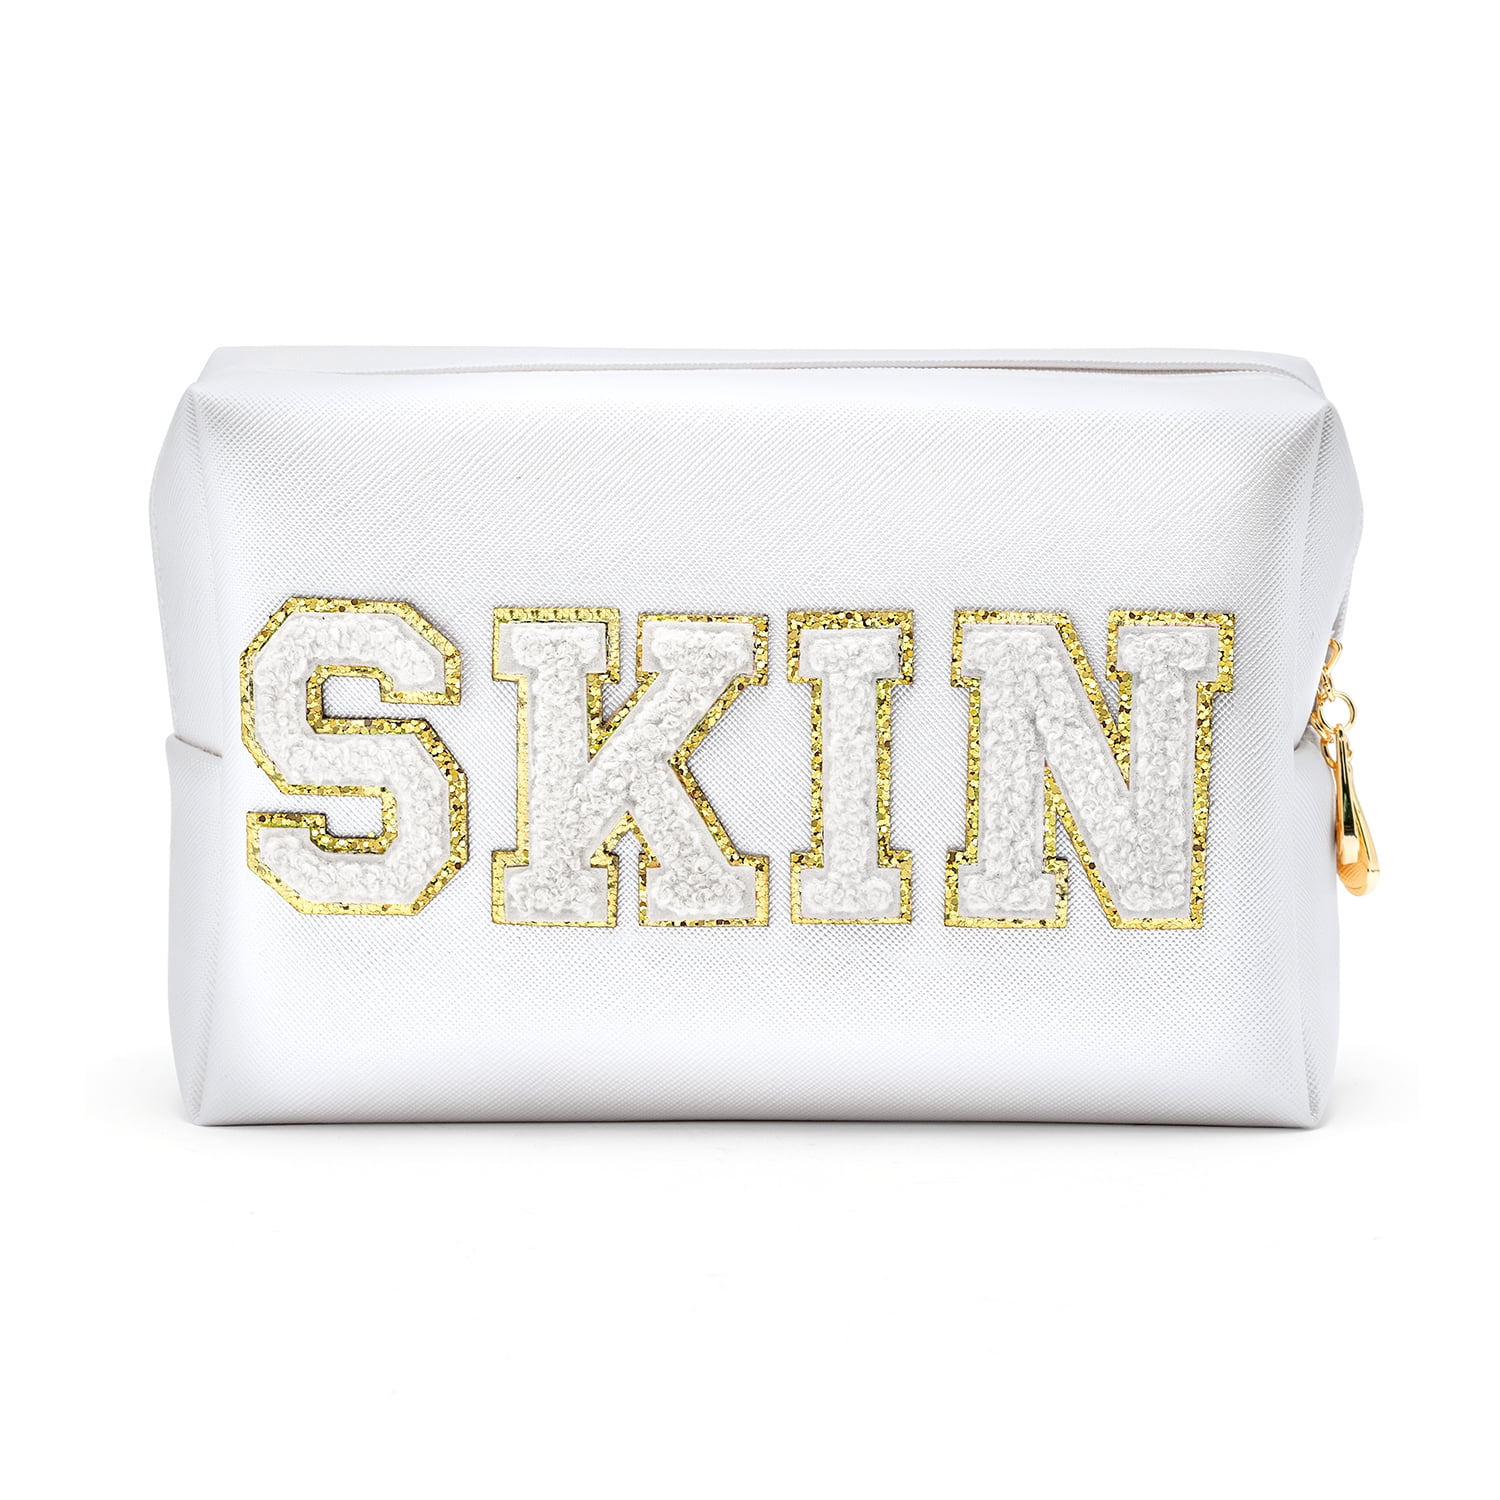 Miucatch Letter Patch Stitch Detail Makeup Bag White Small items stora